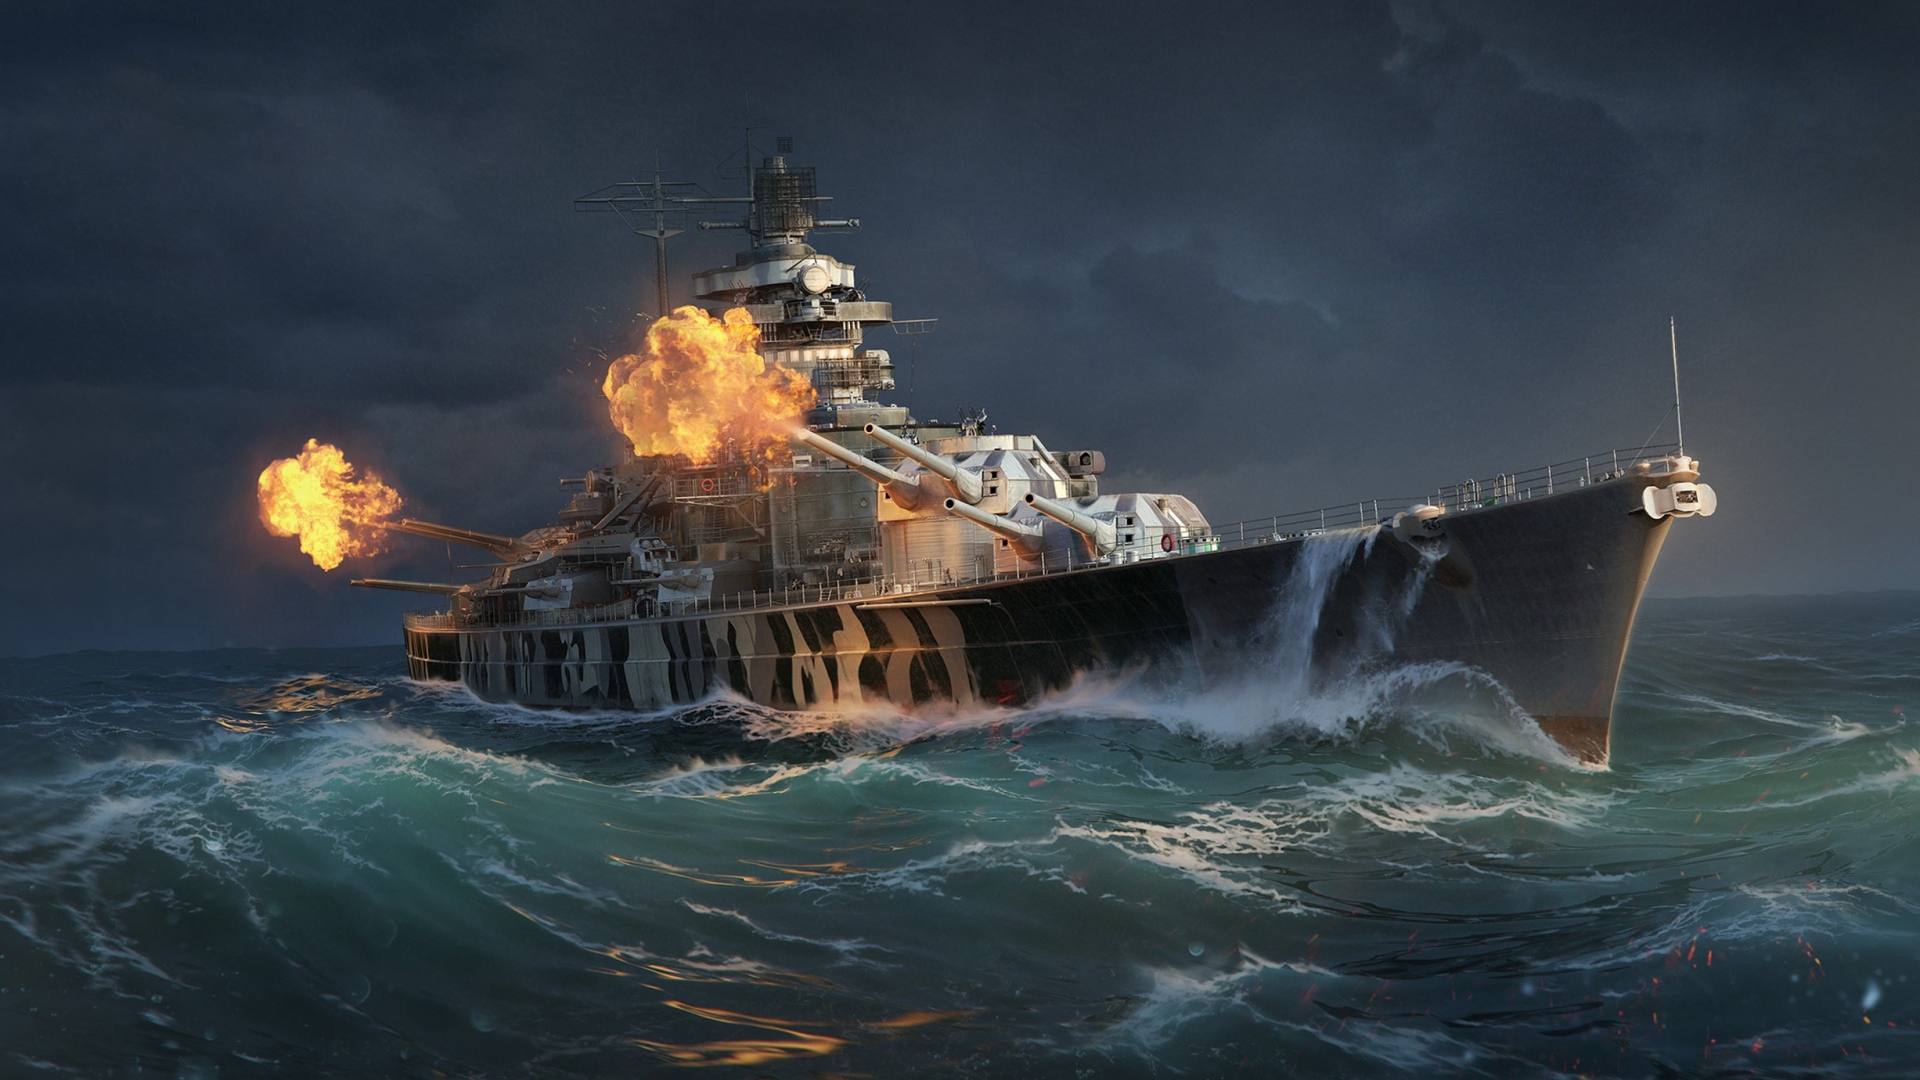 world of warships for mac